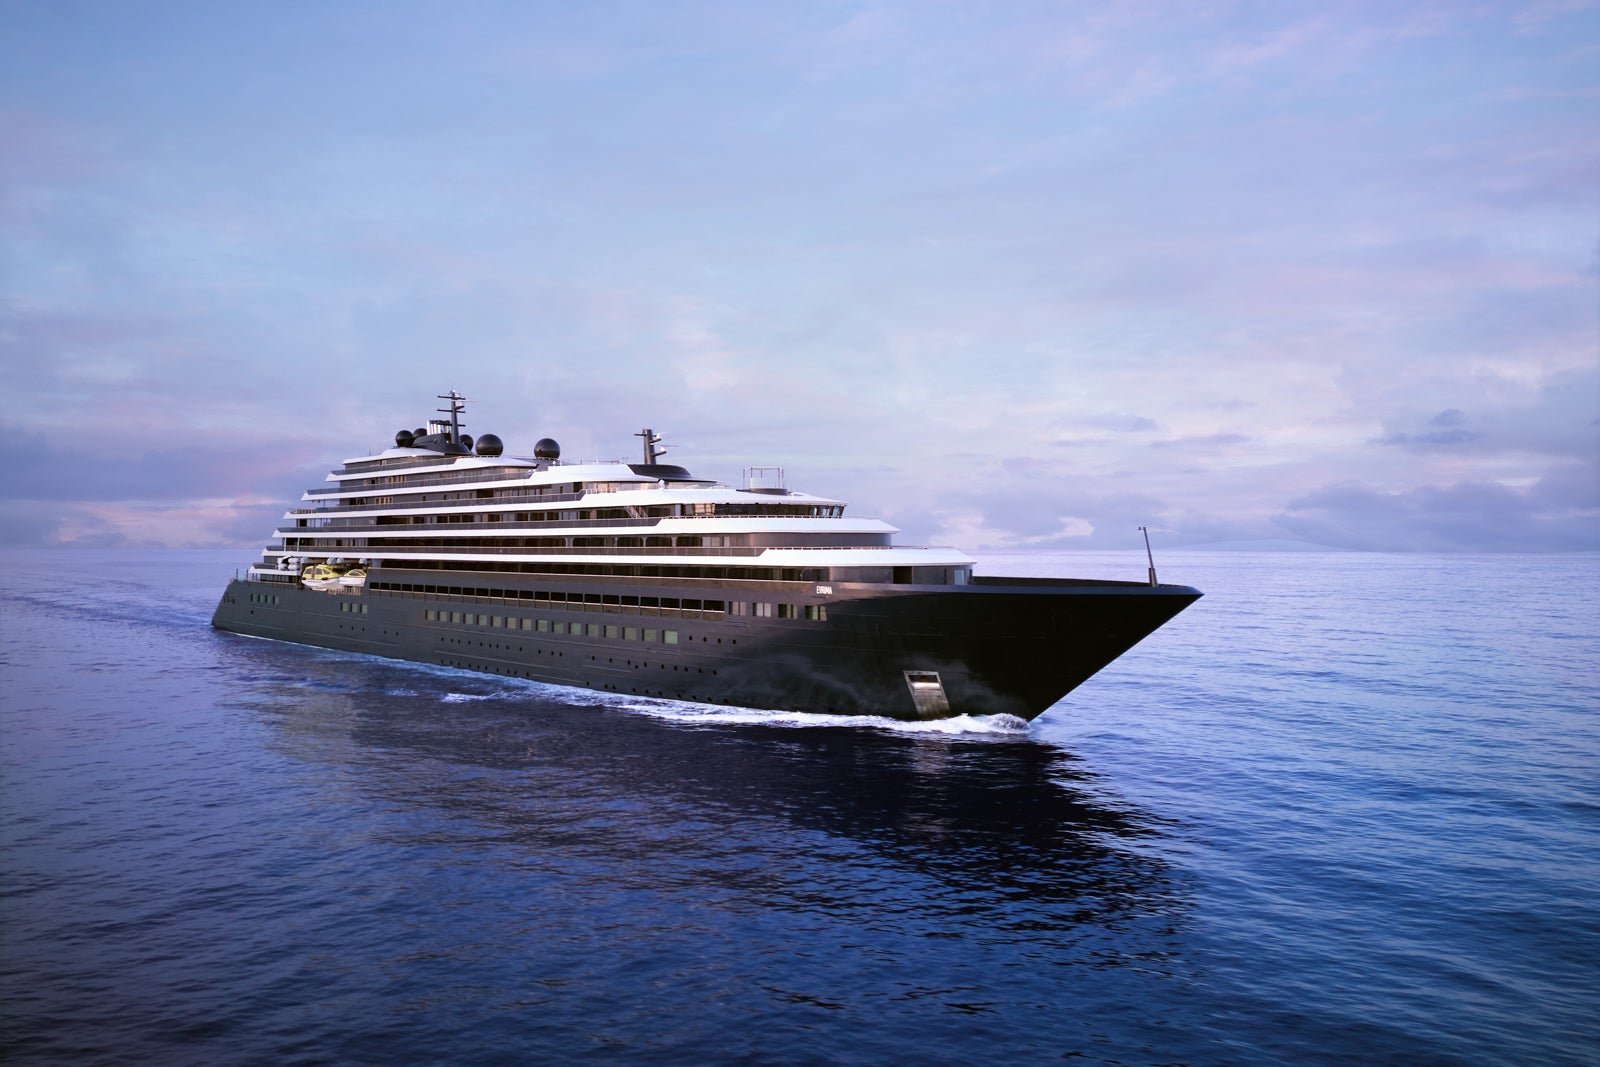 Exterior of superyacht Evrima from The Ritz-Carlton Yacht Collection